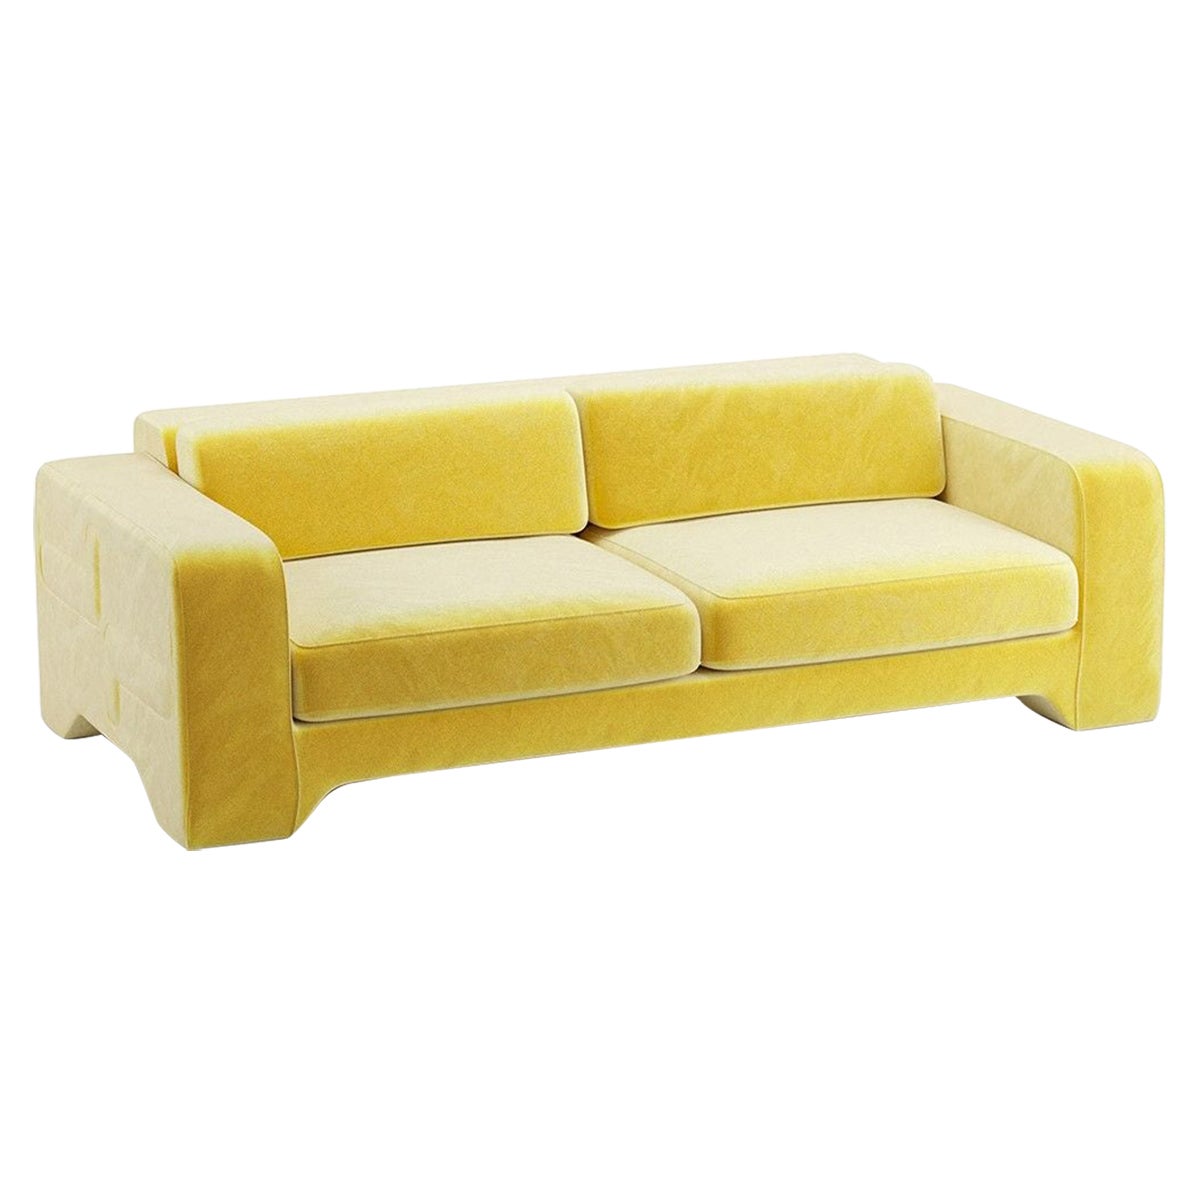 Popus Editions Giovanna 3 Seater Sofa in Yellow Como Velvet Upholstery For Sale